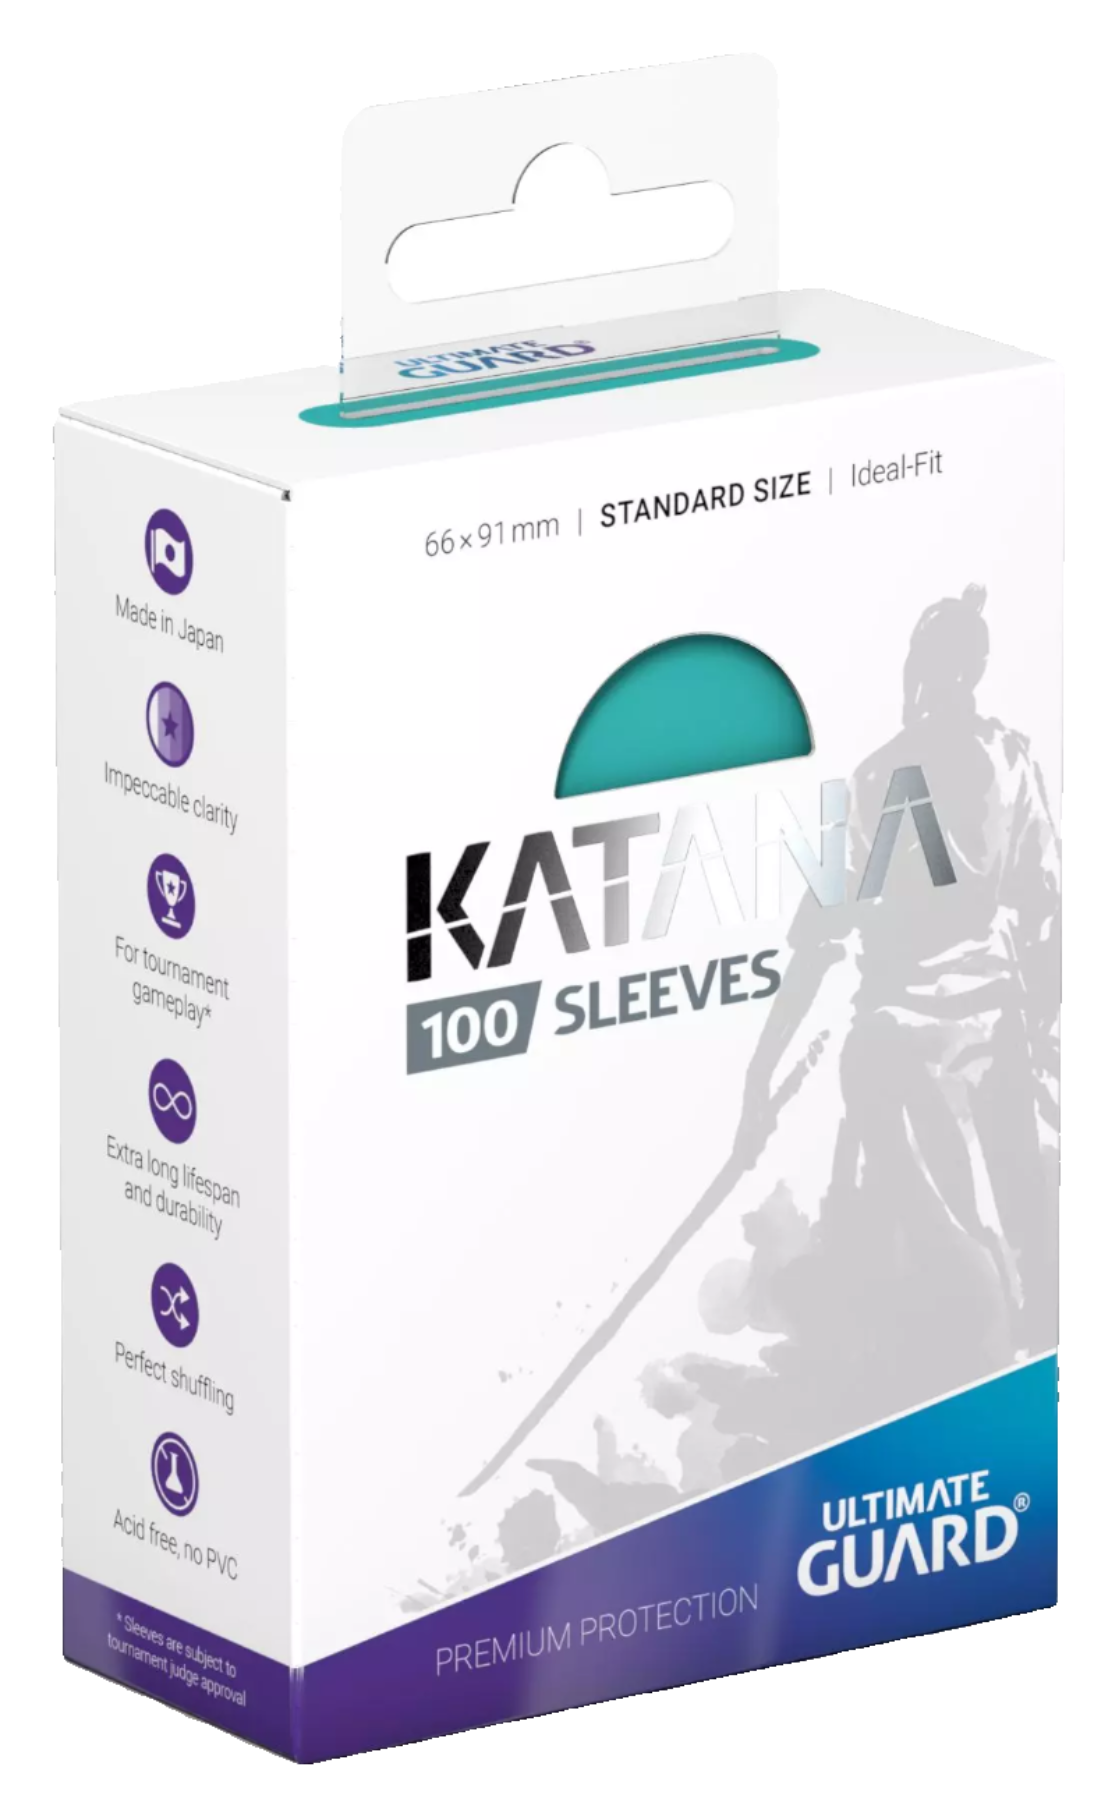 Ultimate Guard - Katana Sleeves - Standard Size - Ideal-Fit - Turquoise - 100pk